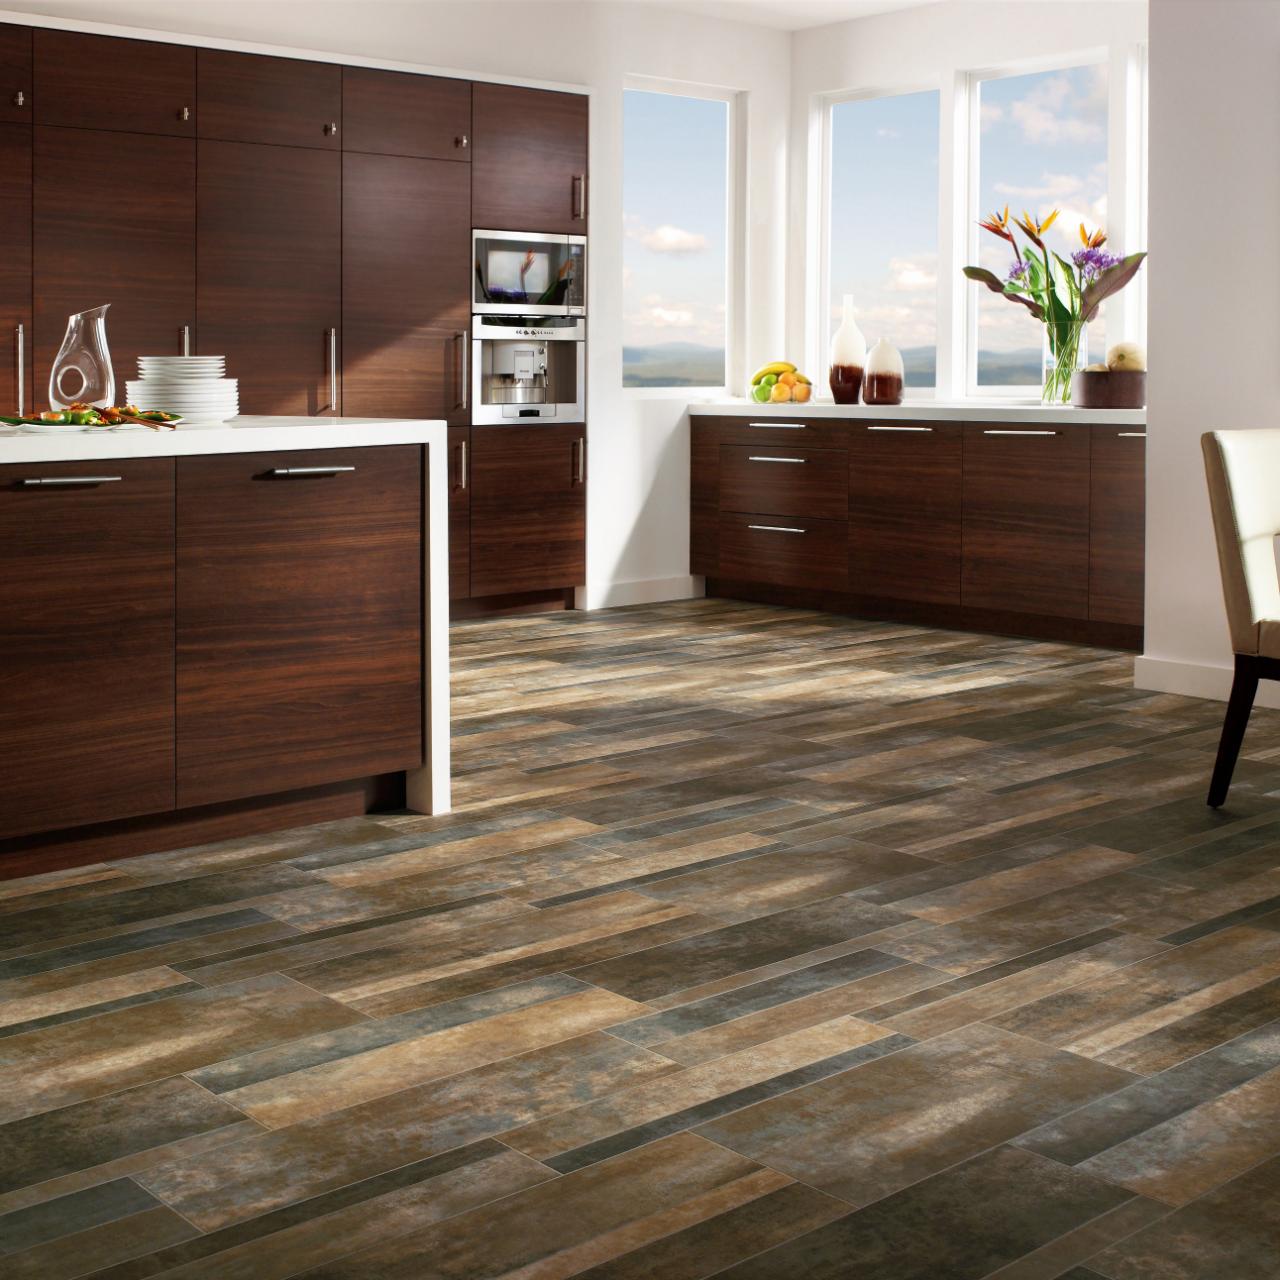 What Is Sheet Vinyl Flooring? What Is It Made Of?